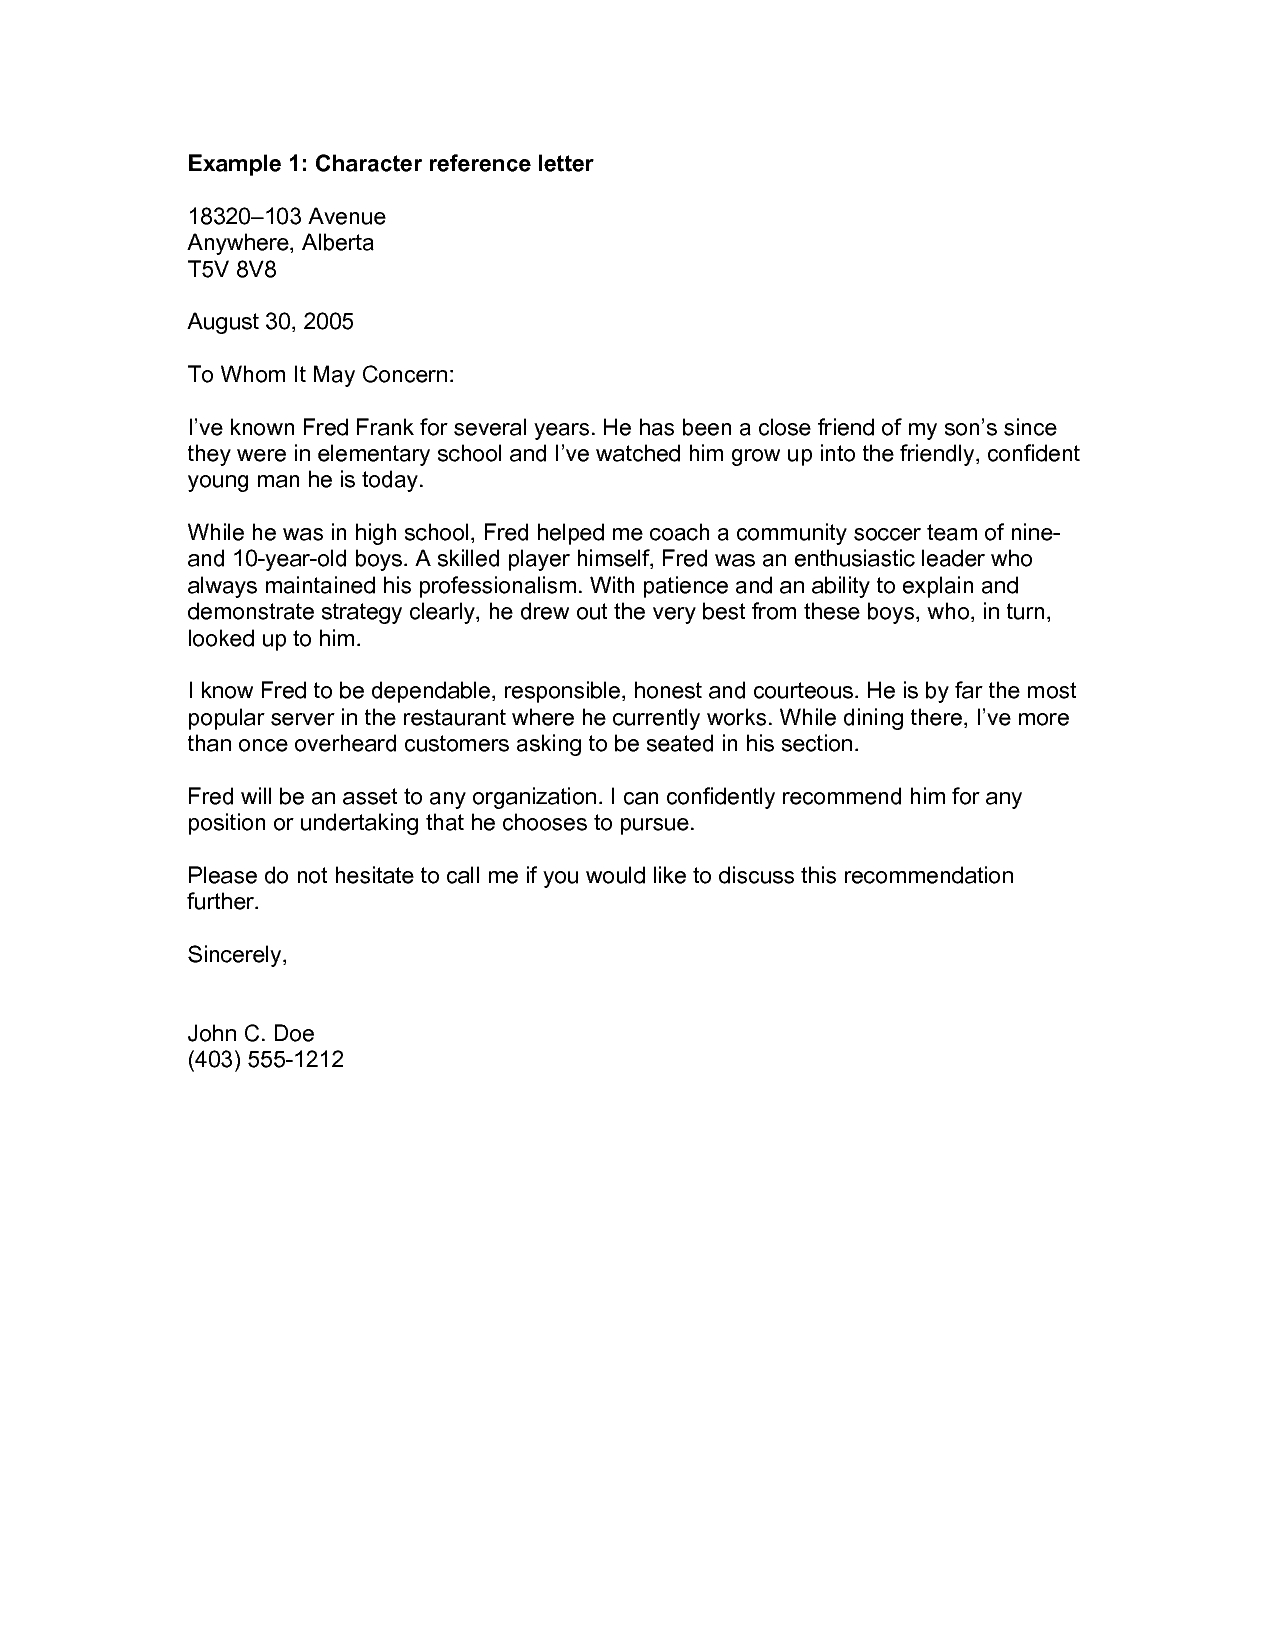 Business Reference Letter Template - Re Mendation Letter for A Friend Template Opengovpartnersorgletter